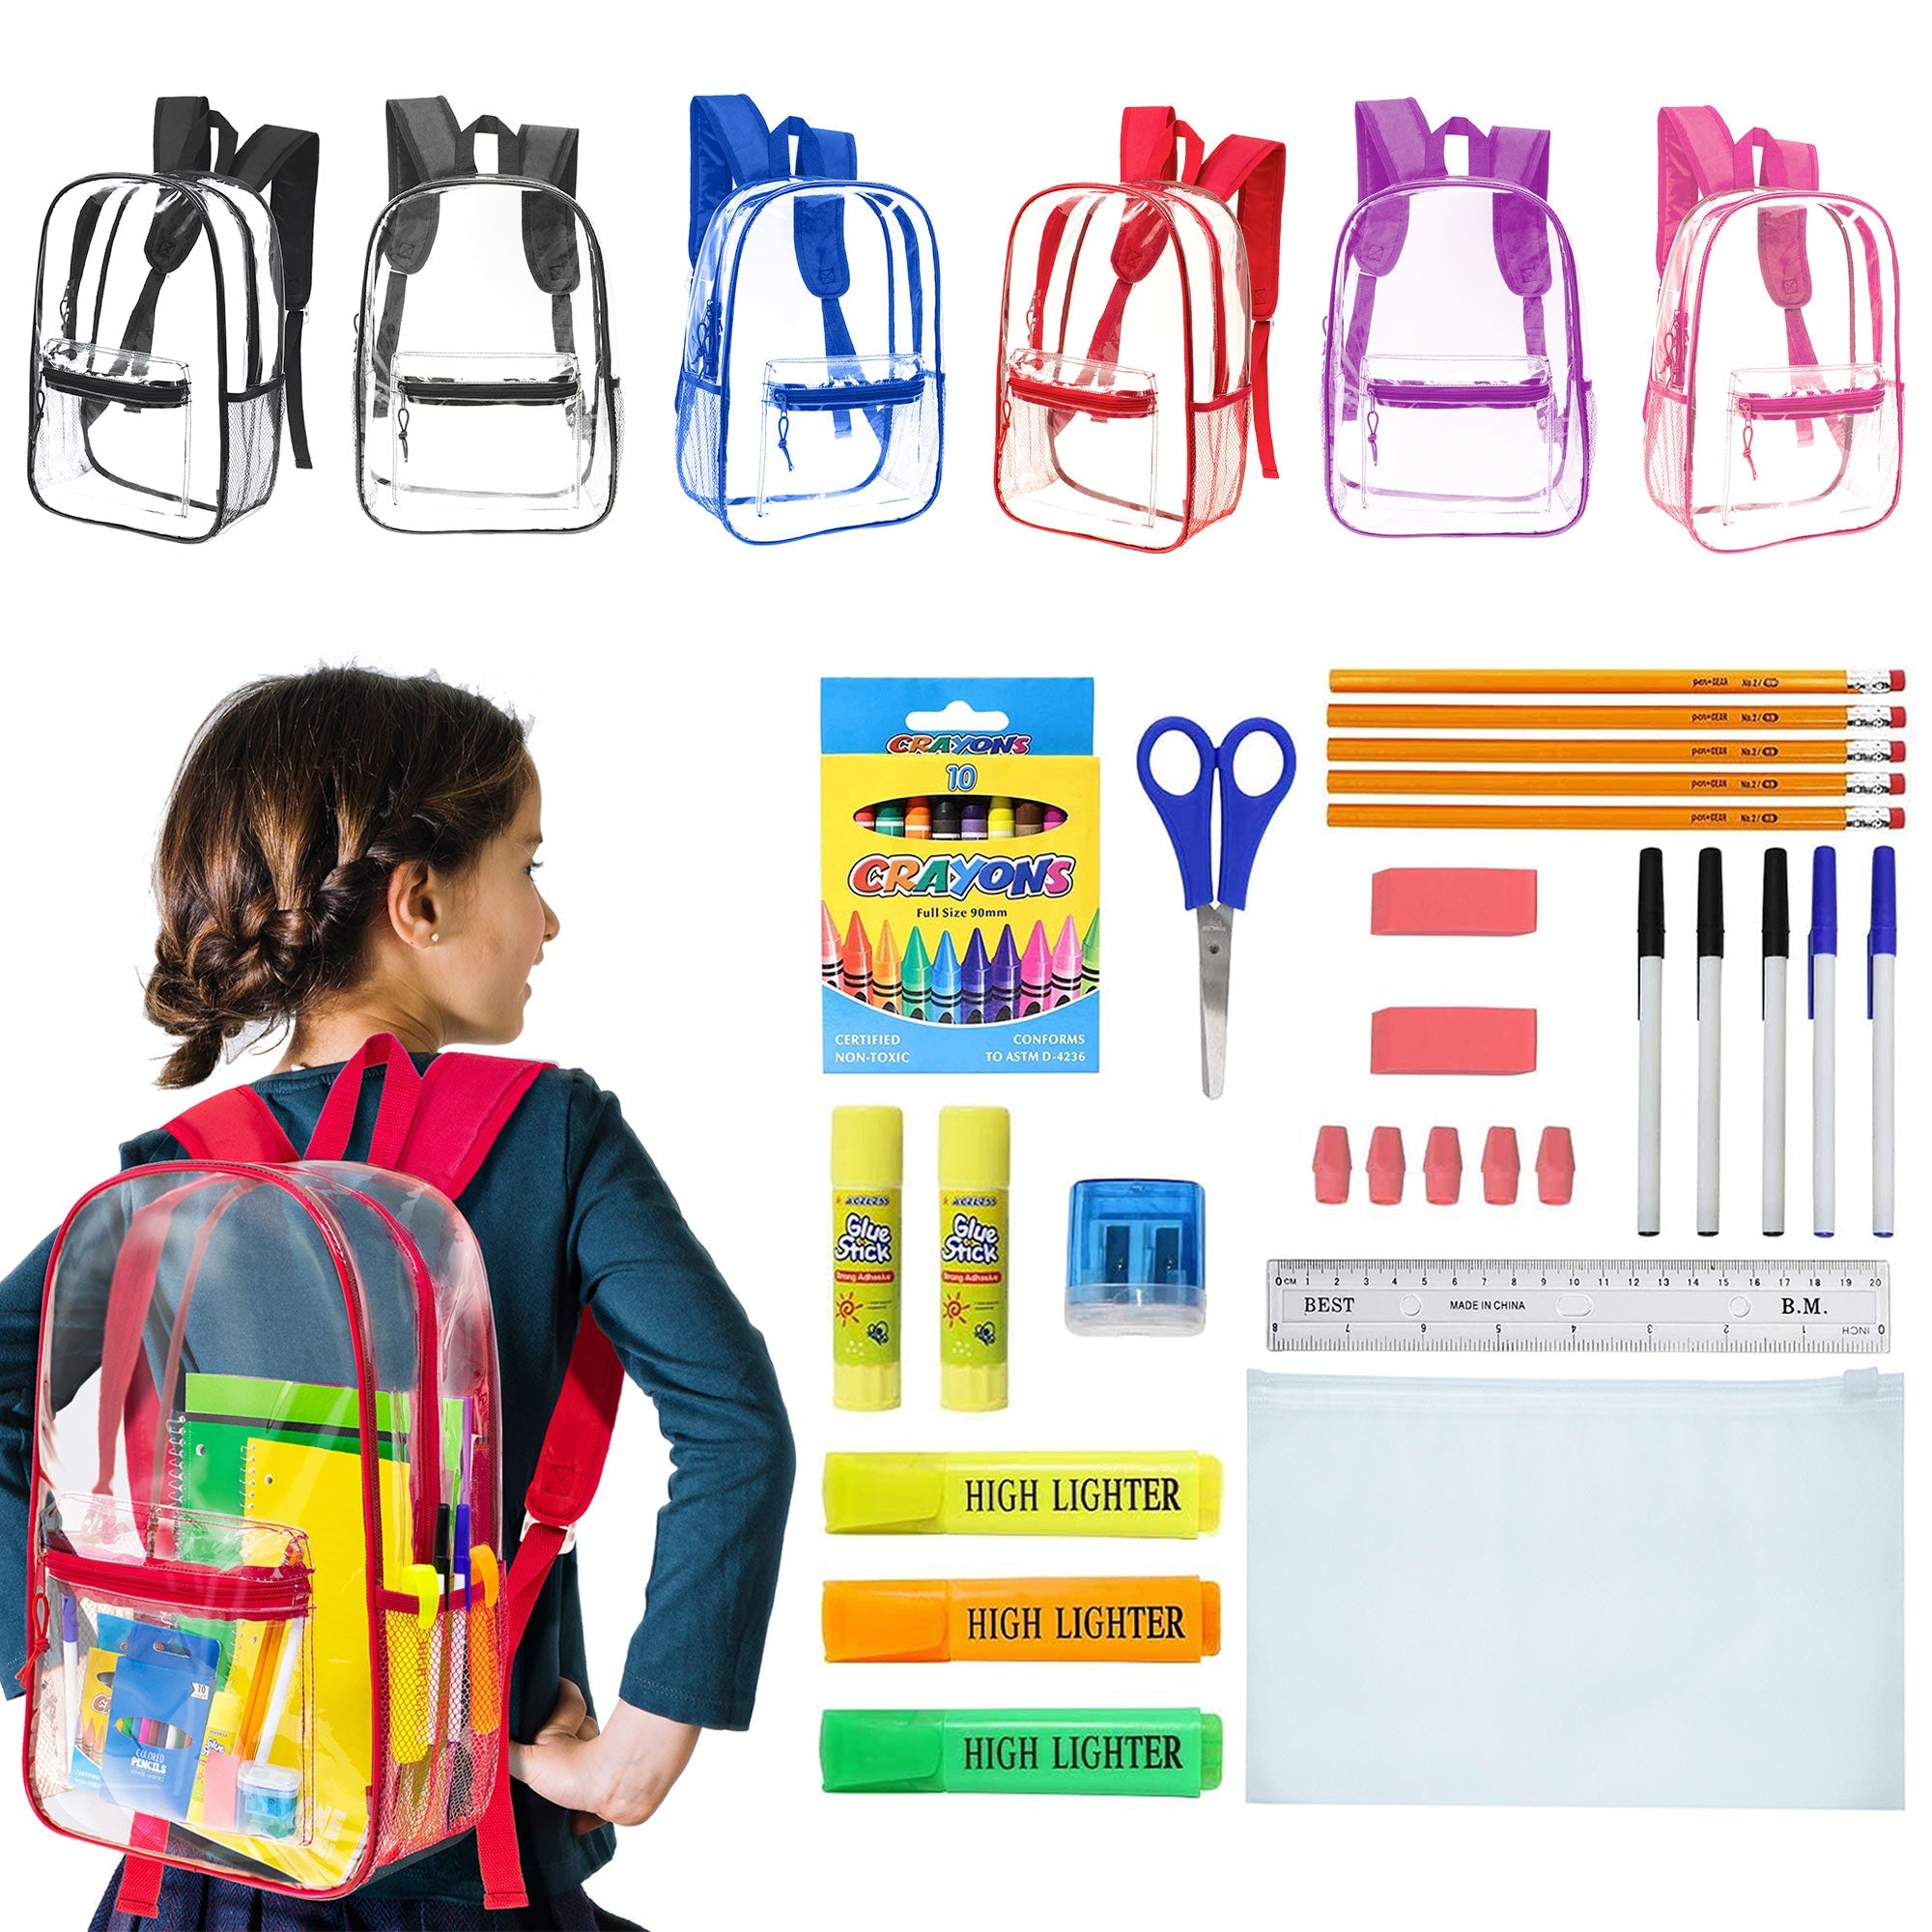 12 Clear Wholesale 17" Backpacks in Assorted Colors and 12 Bulk School Supply Kits of Your Choice